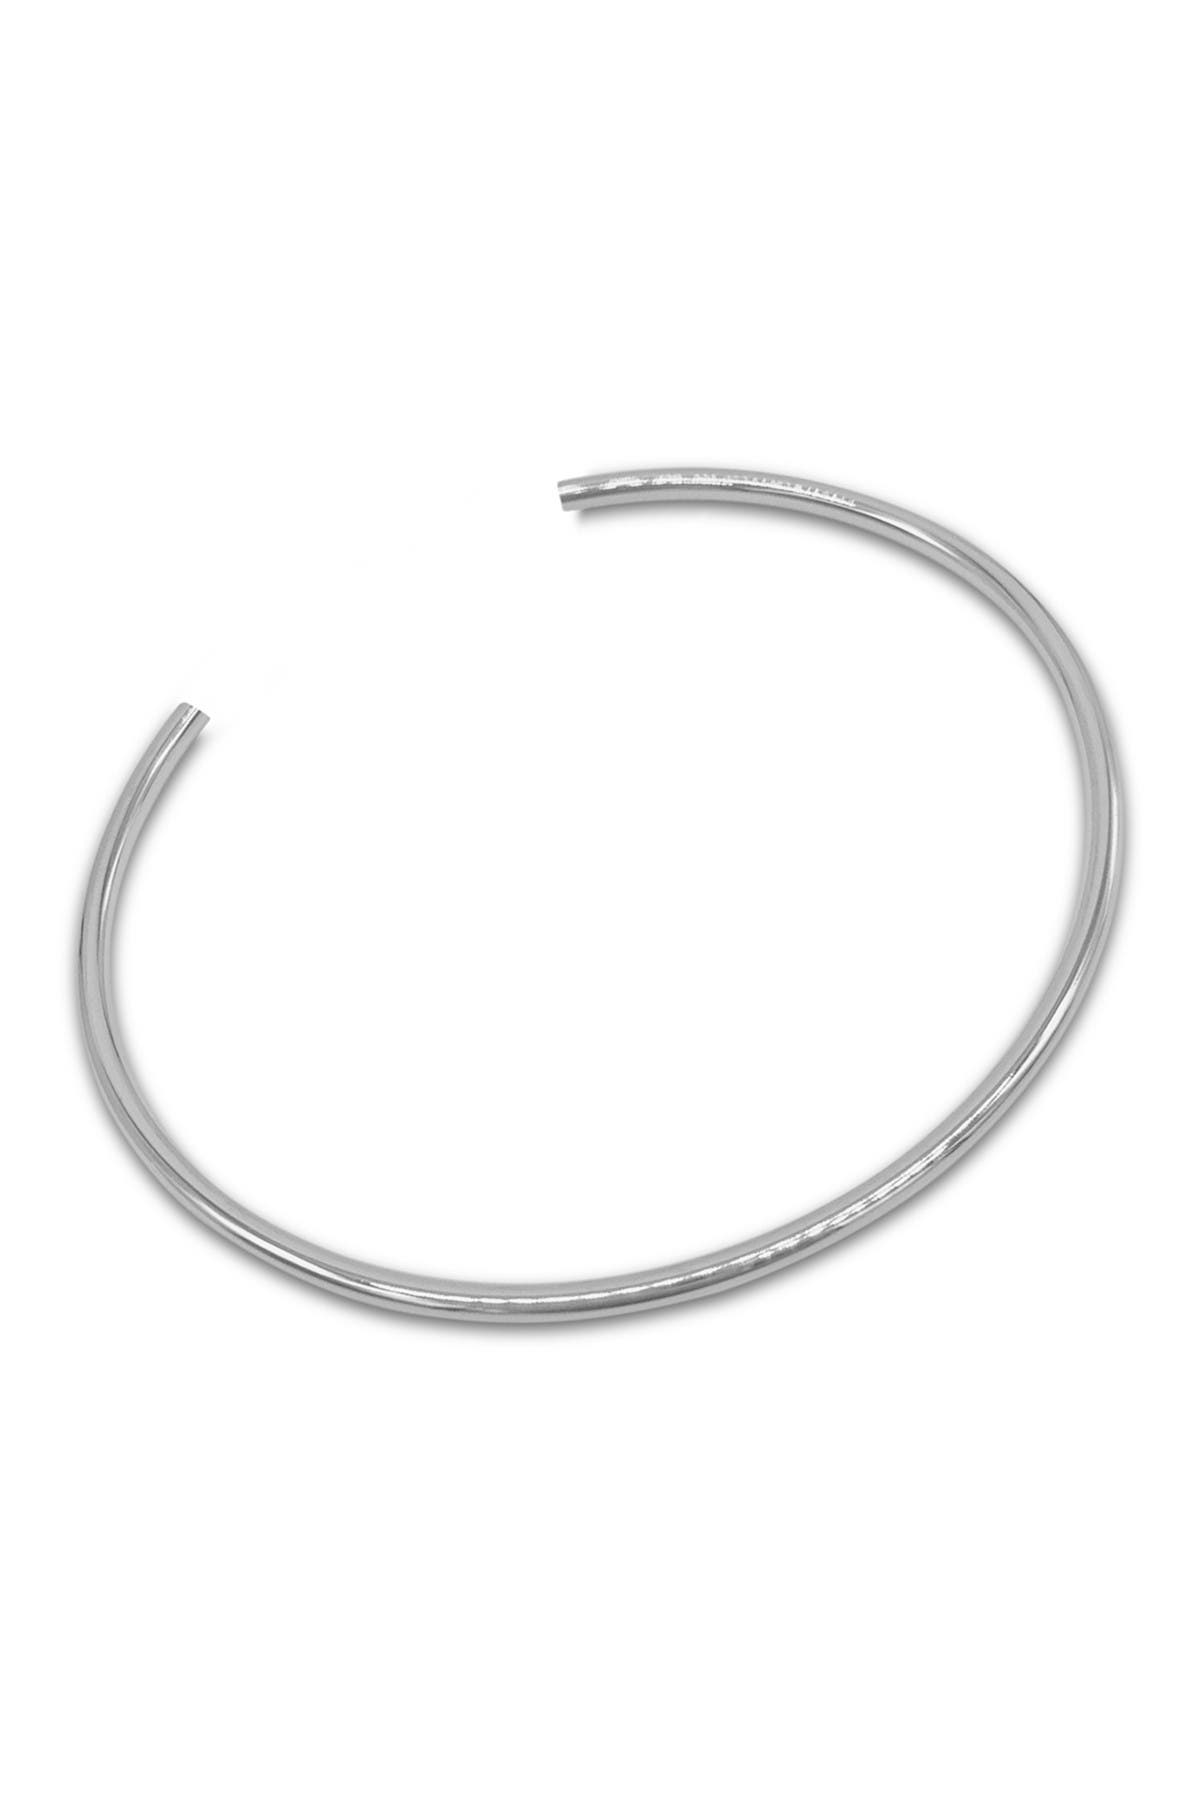 Adornia White Rhodium Plated Stainless Steel Cuff Bangle Bracelet In Silver